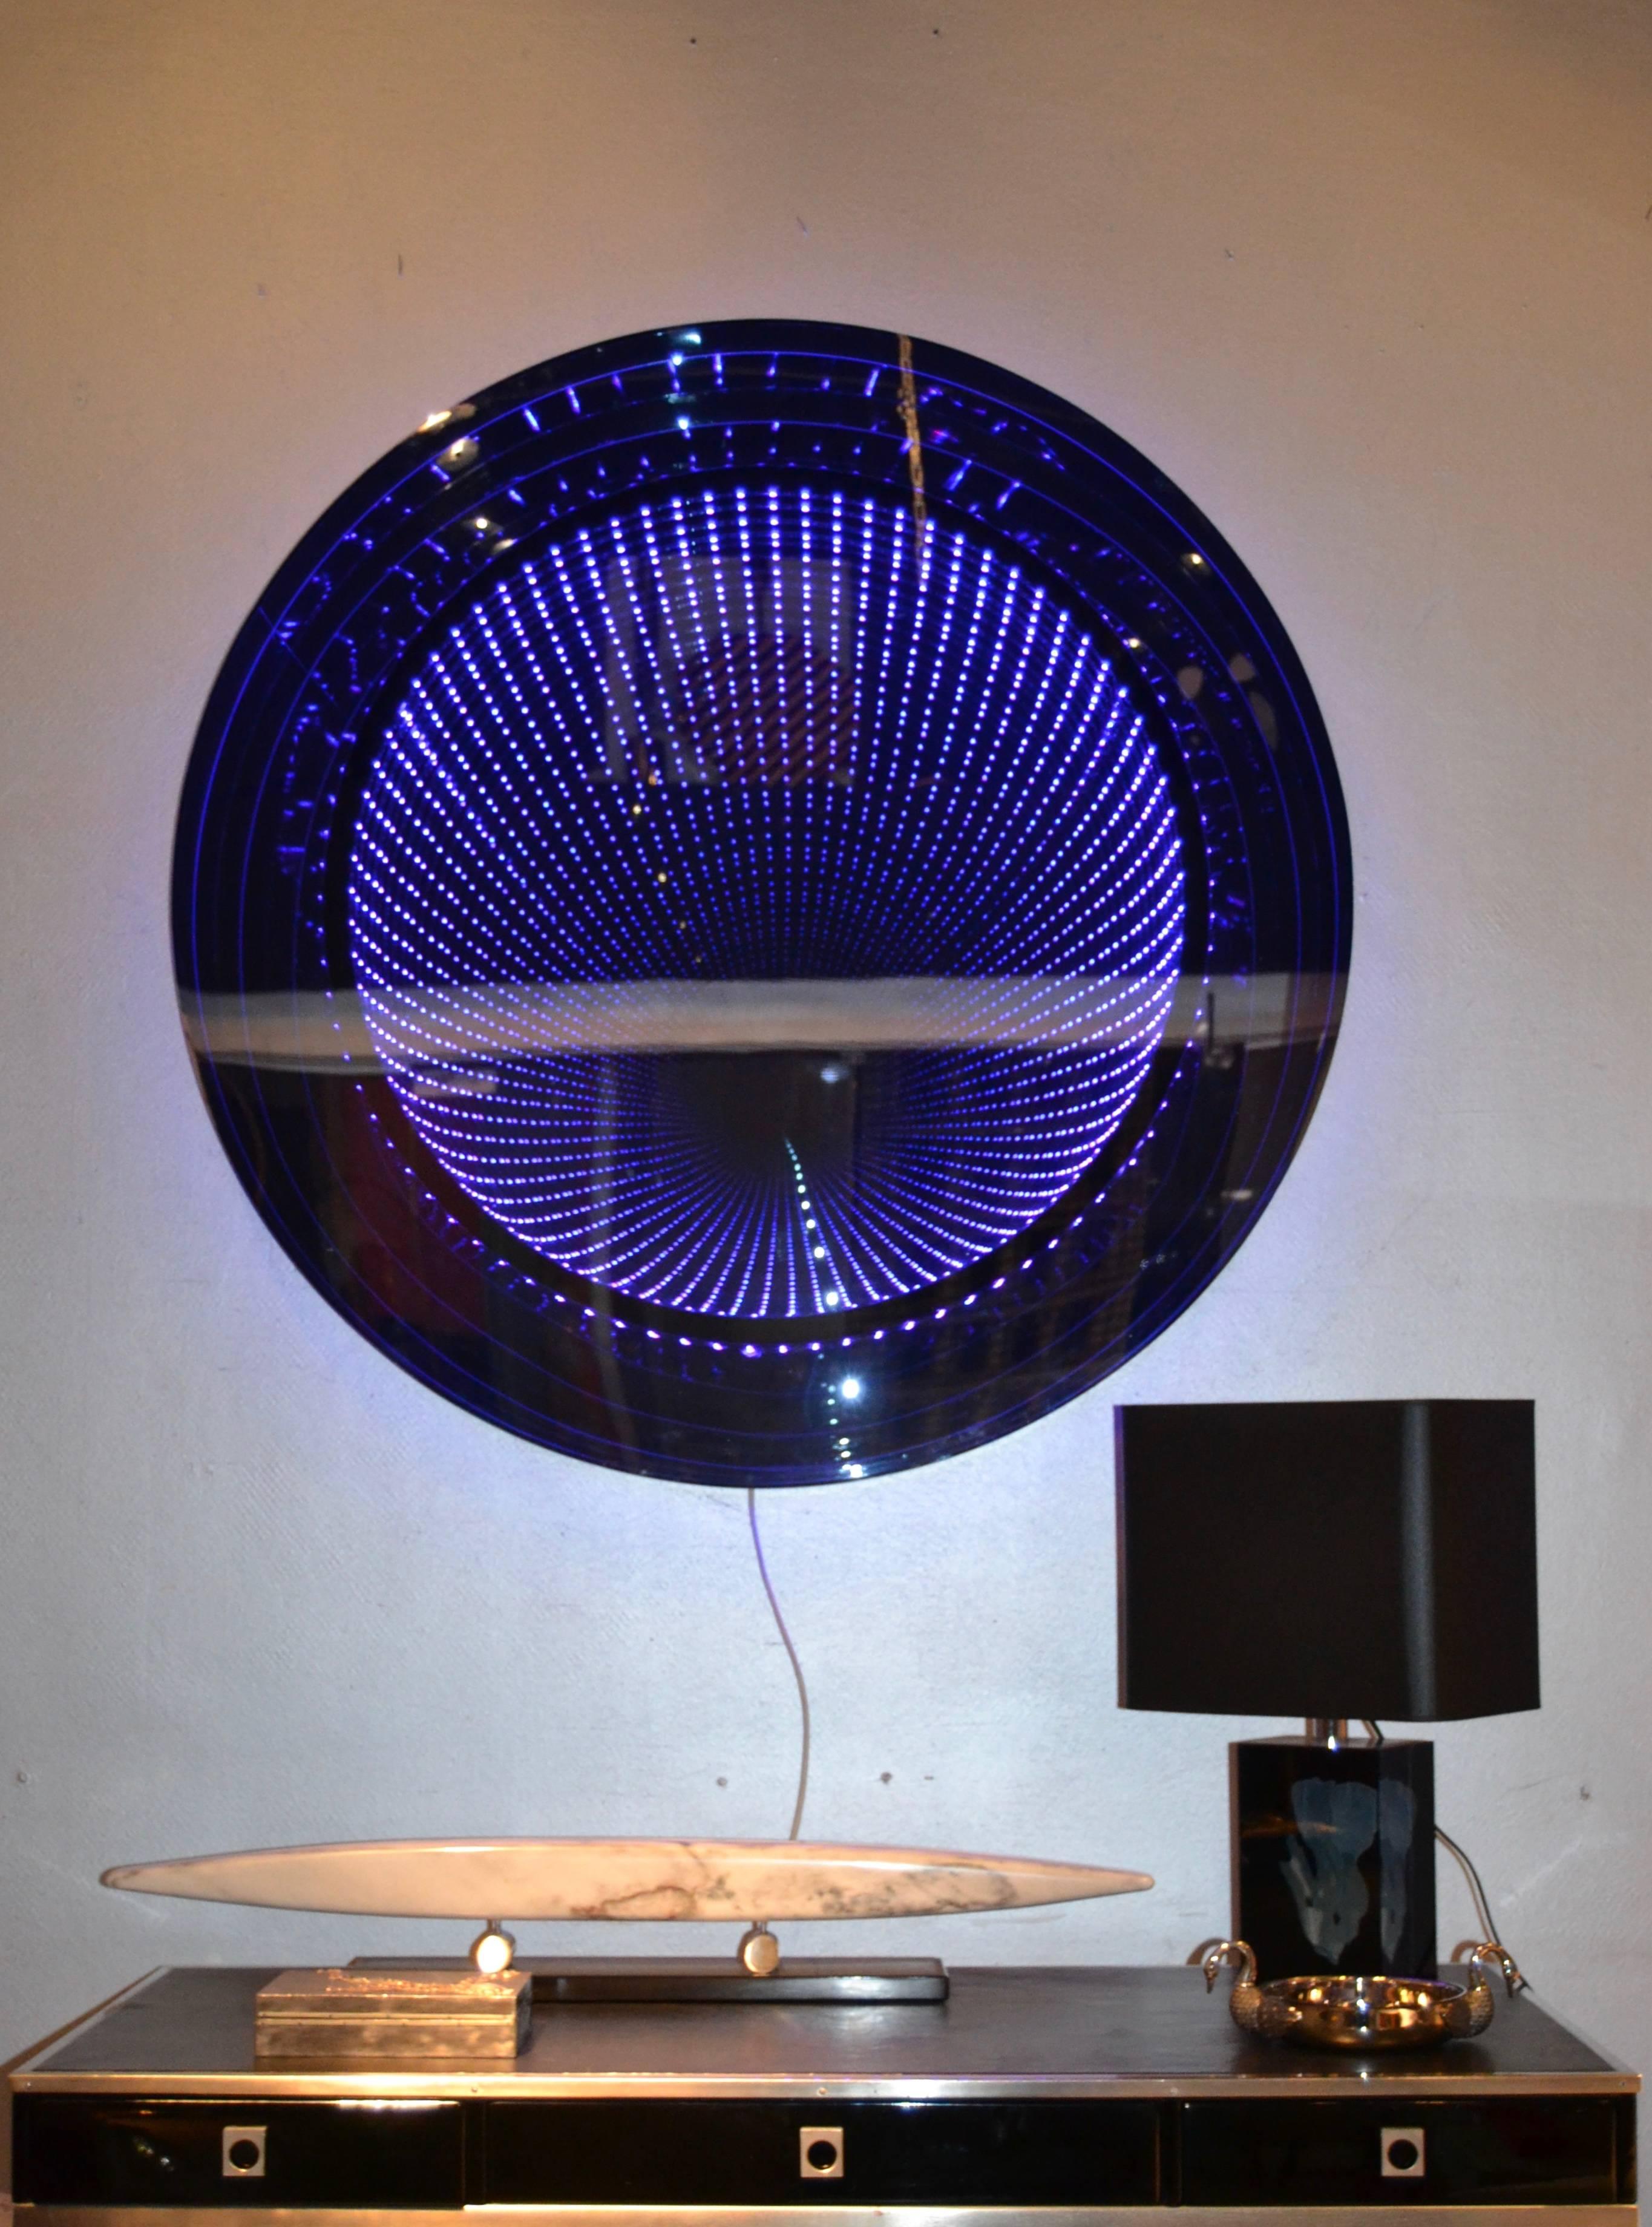 Large infinity mirror by the French artist Raphael Fenice with blue light
The piece is entirely in mirrored Lucite and wen is of looks like a mirror.